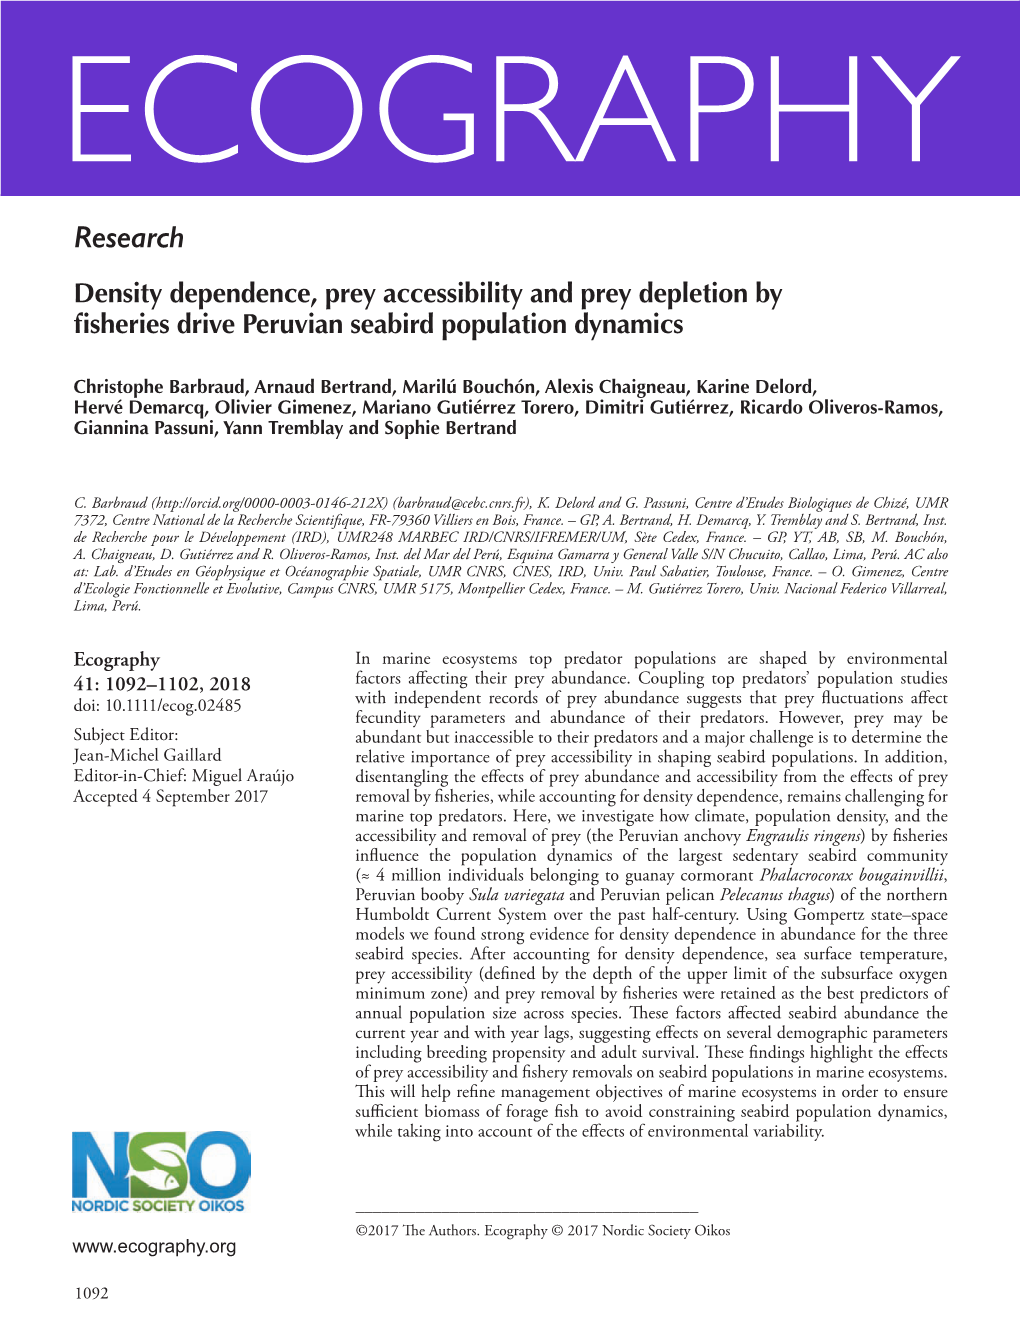 Research Density Dependence, Prey Accessibility and Prey Depletion by Fisheries Drive Peruvian Seabird Population Dynamics